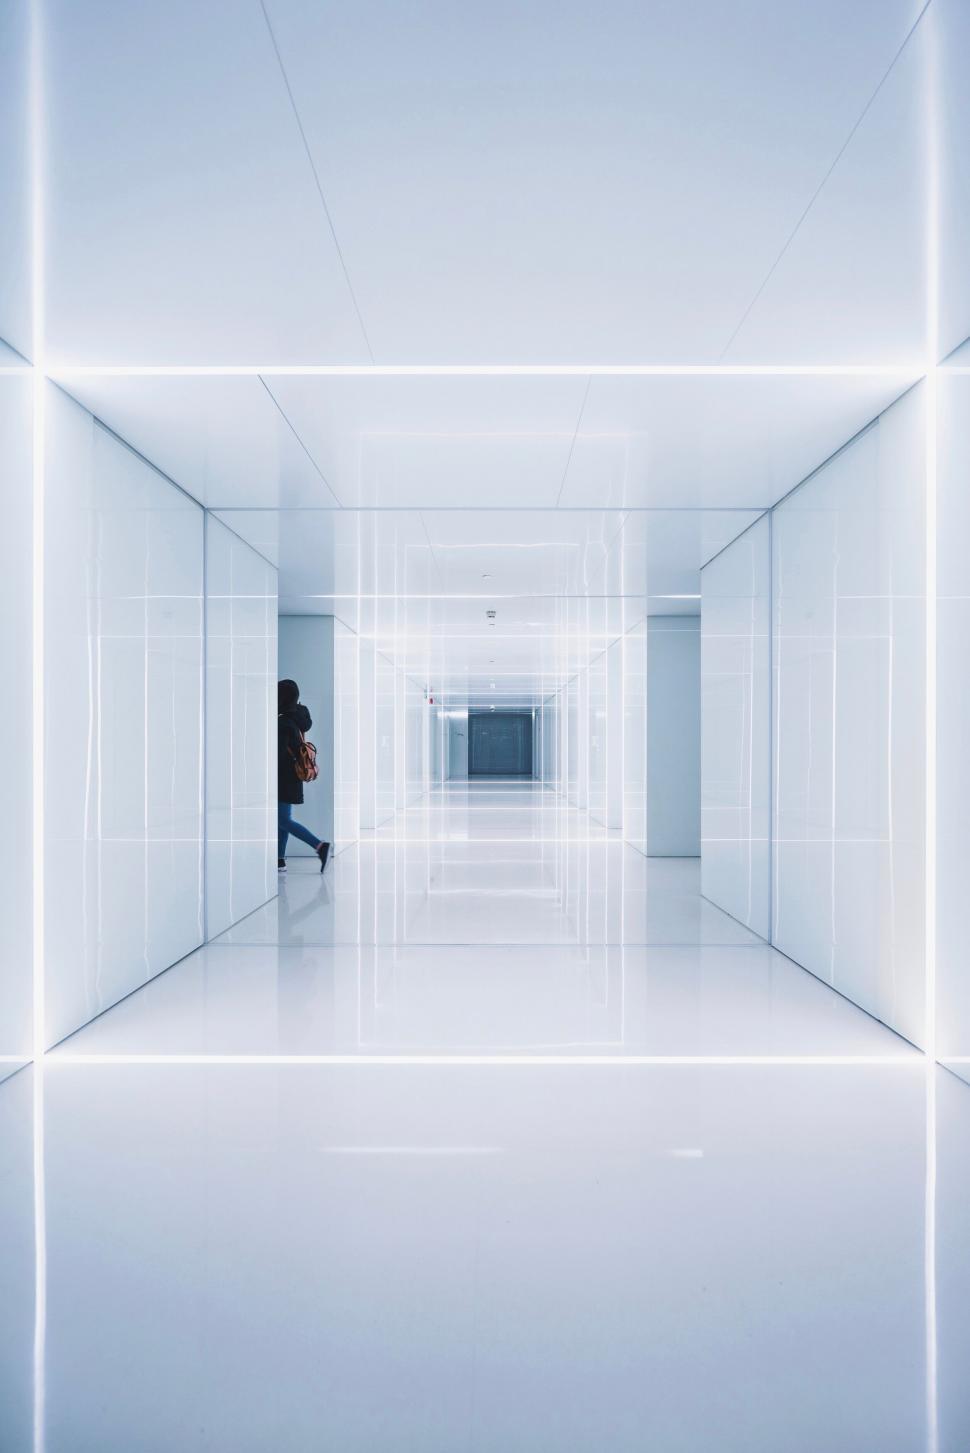 Free Image of A person walking in a white hallway 